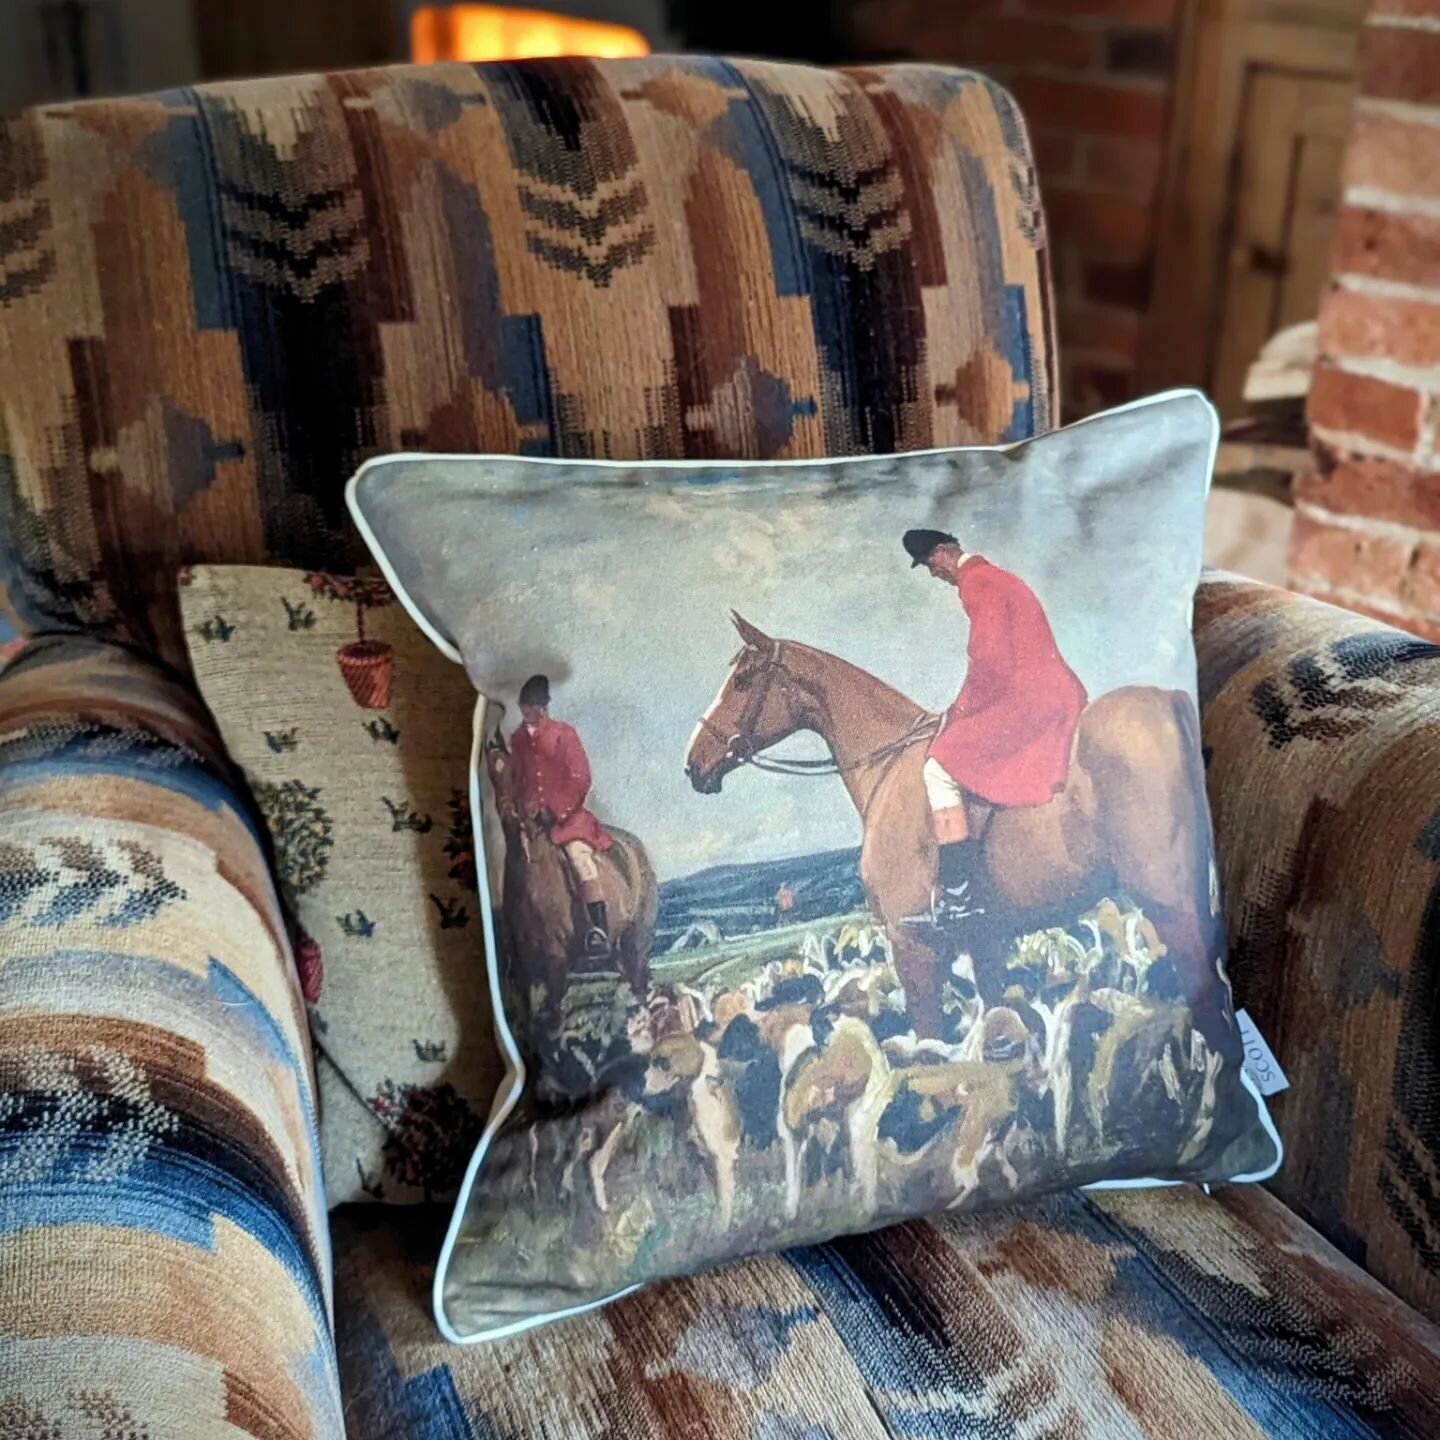 New Cushions to fall in love with ✨

We have a small number of cushions in these new designs, currently available on-line.

Two wonderful images from the @munnings_art_museum 'Nobby Gray with the Hunt' and 'Mare &amp; Foal' We think these have worked